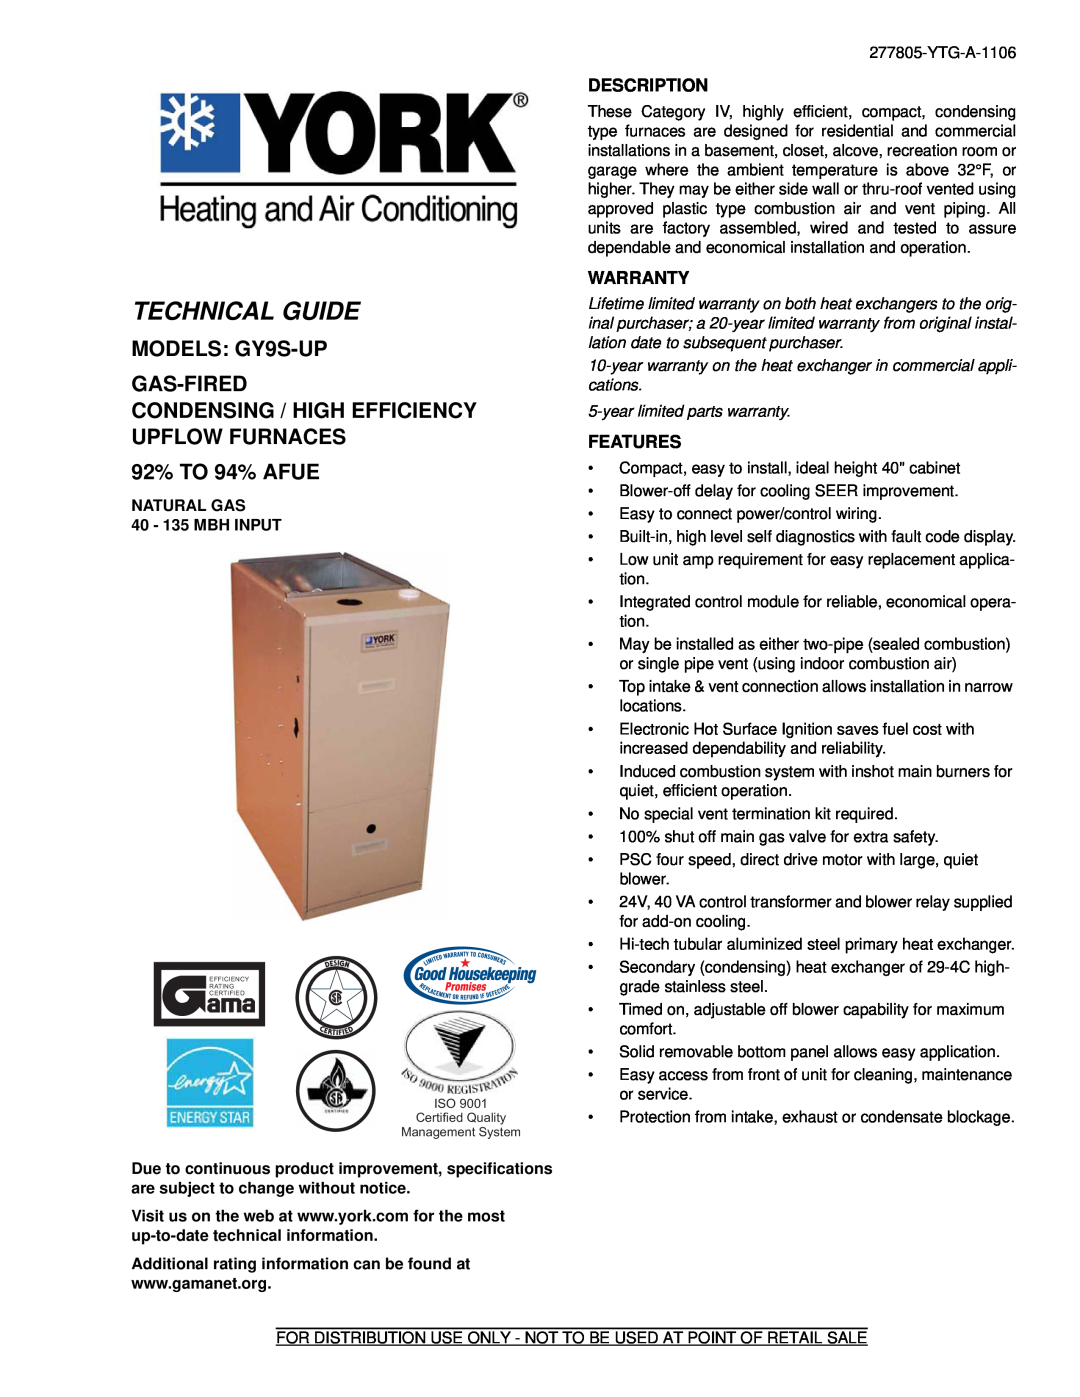 York warranty MODELS GY9S-UP GAS-FIRED, Condensing / High Efficiency Upflow Furnaces, 92% TO 94% AFUE, Description 